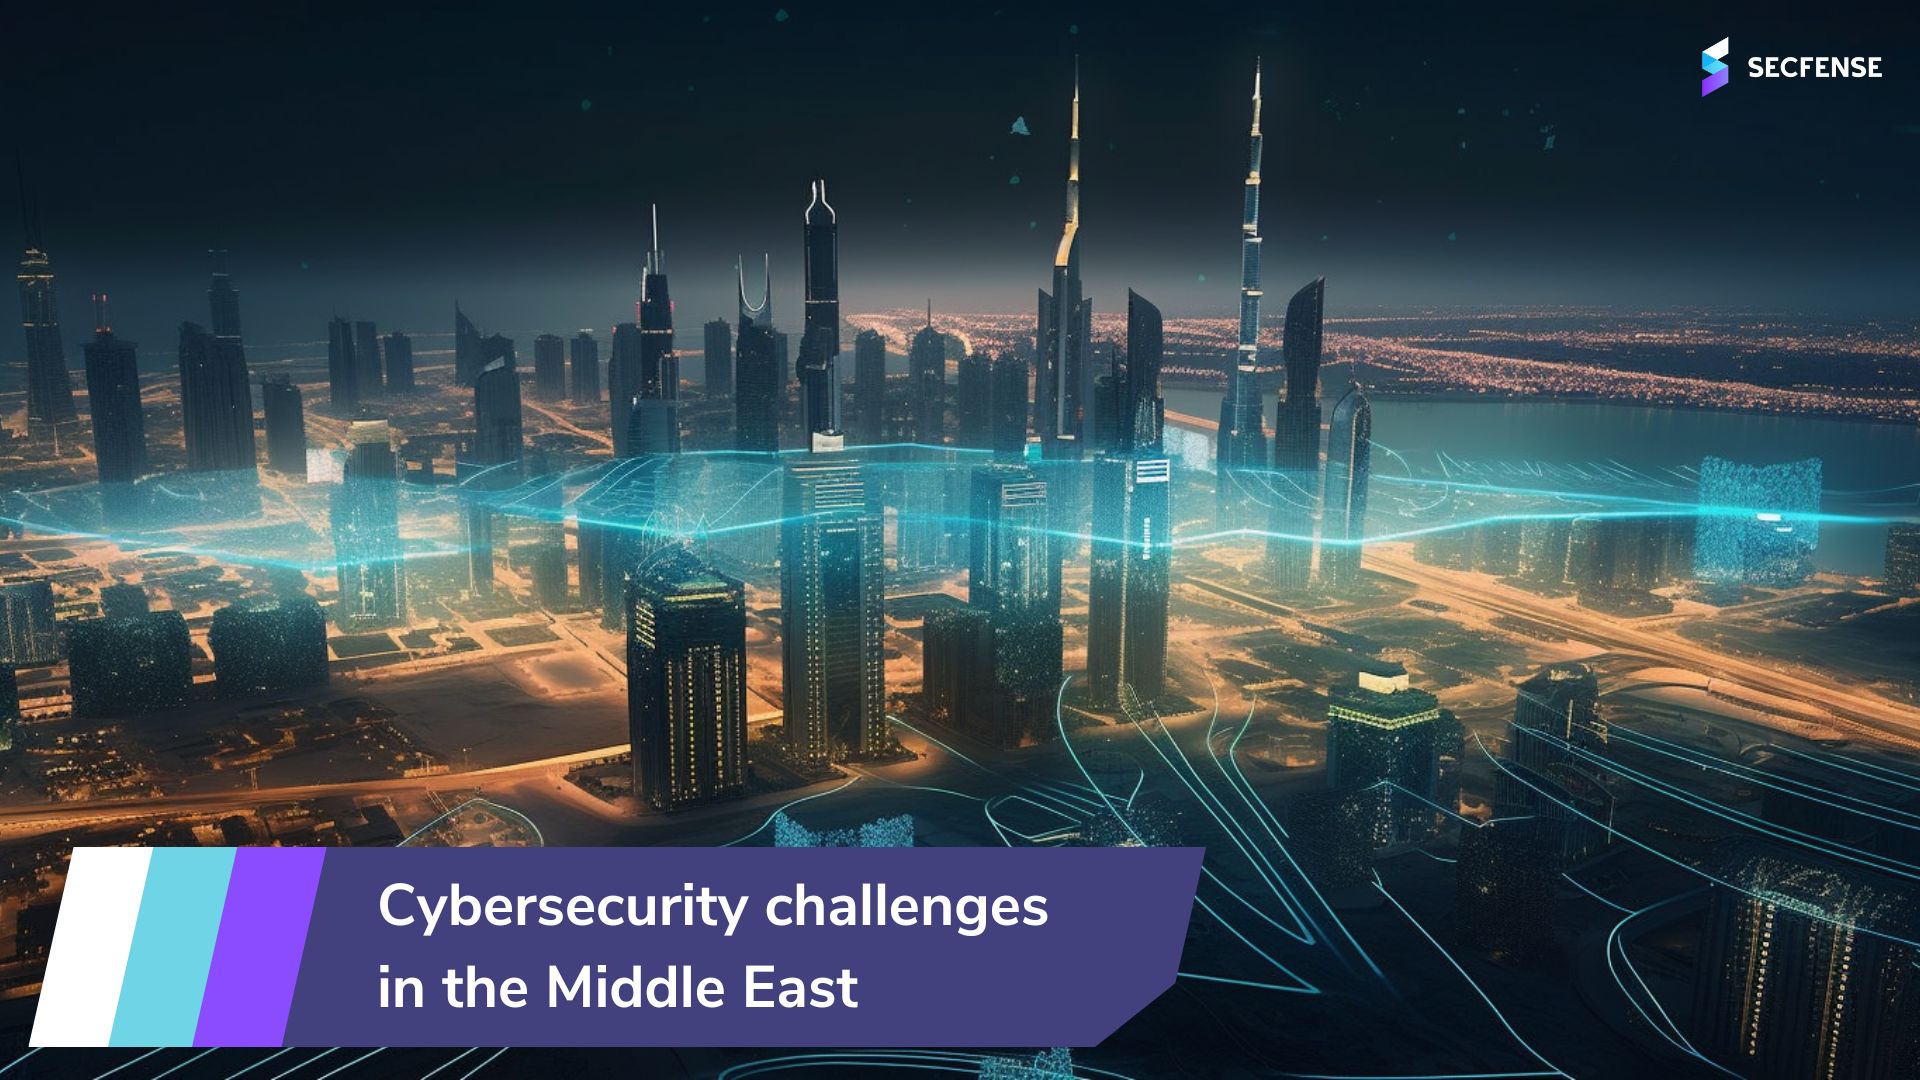 Secfense lists Cybersecurity challenges in the Middle East